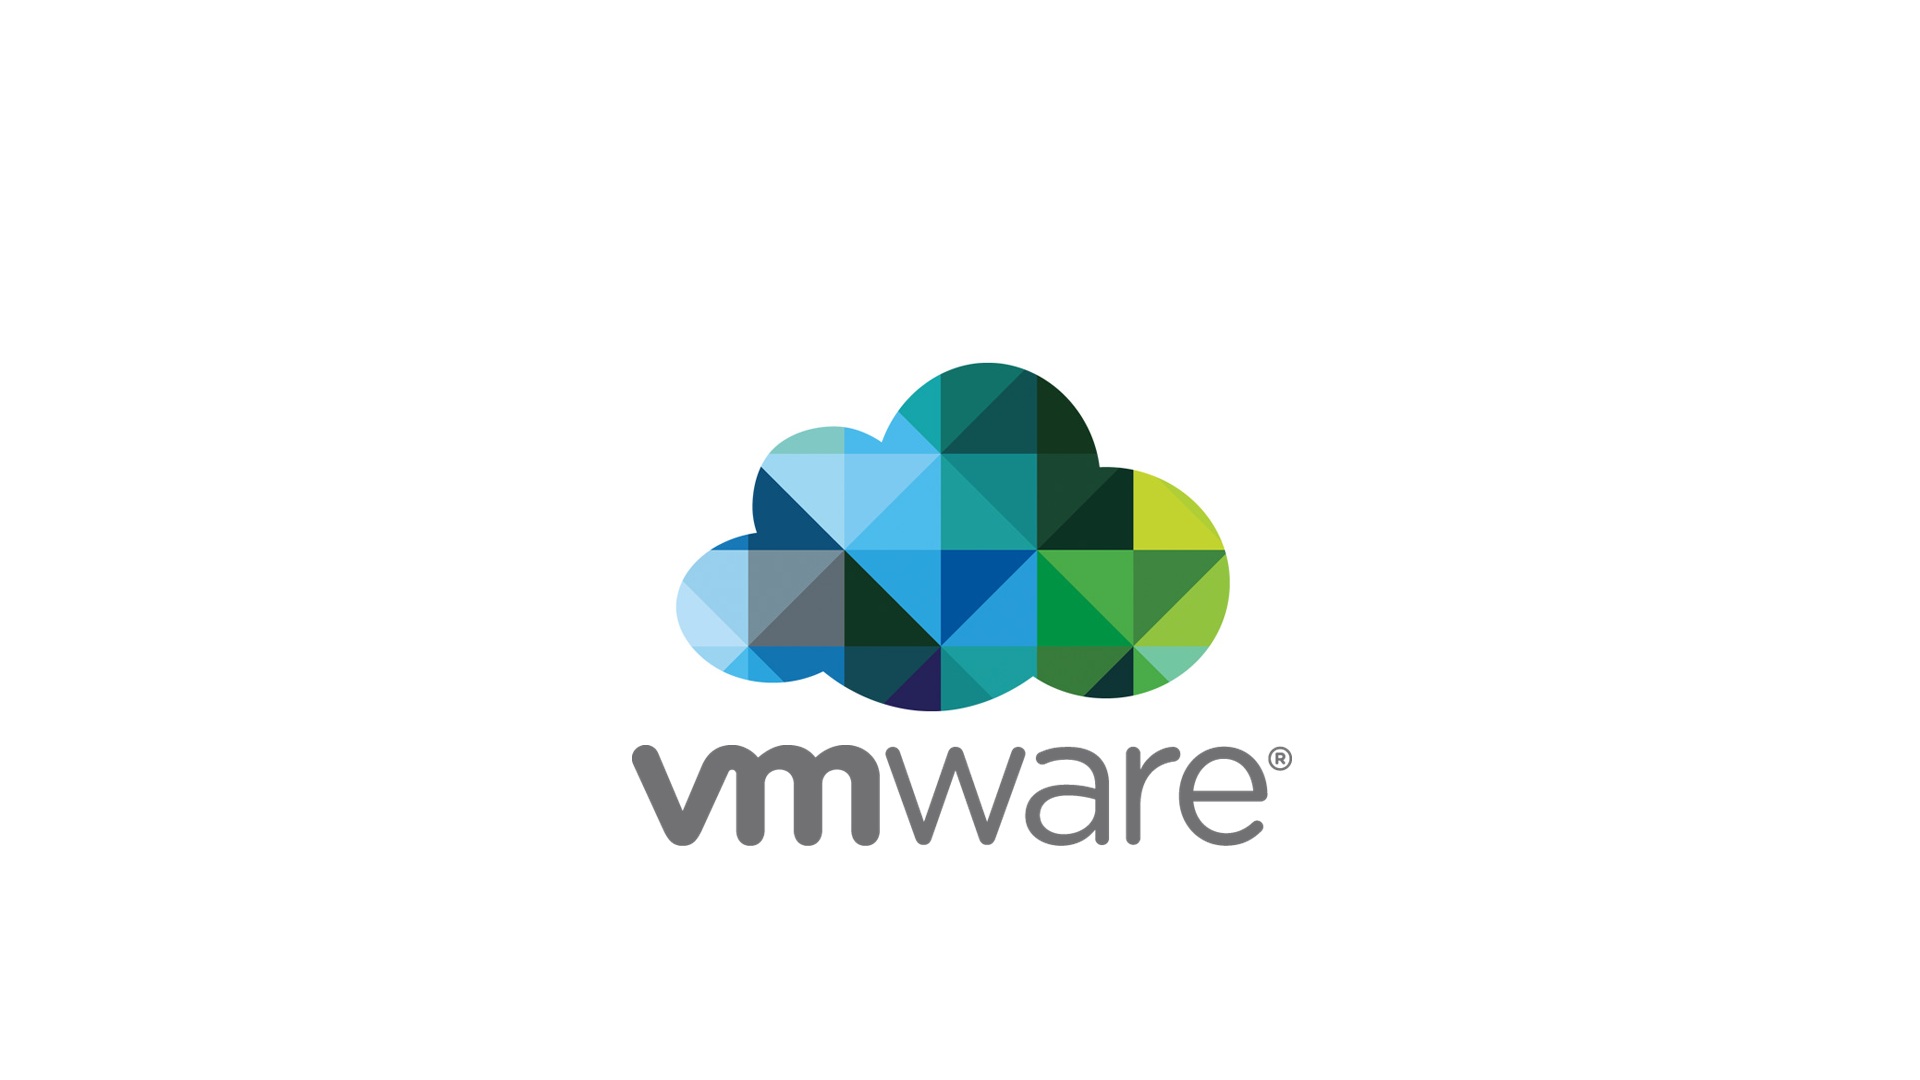 vmware free download for windows